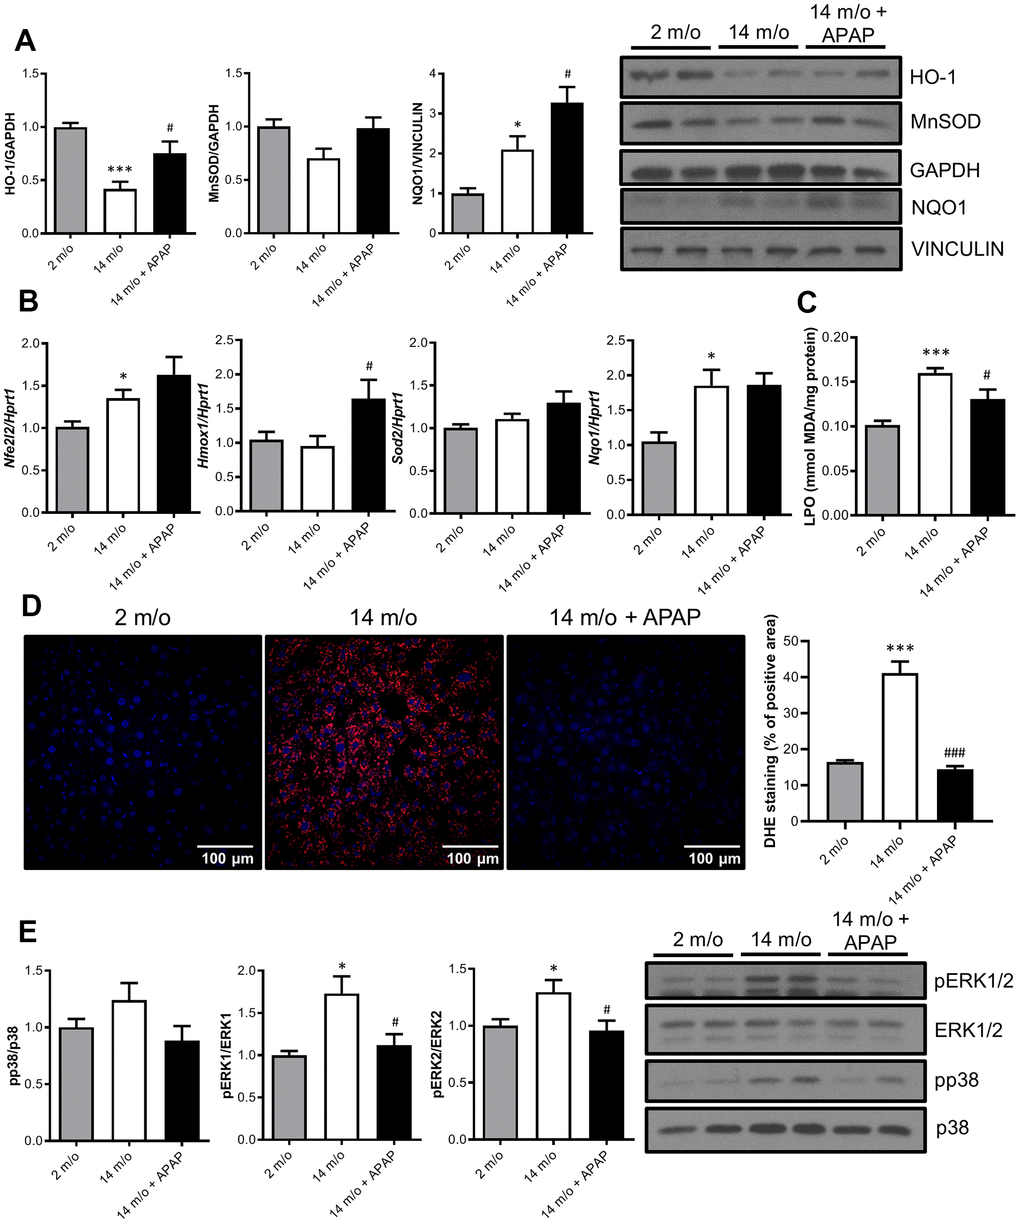 Chronic APAP administration at an infratherapeutic dose increases Nrf2-targets HO-1, NQO1 and MnSOD and enhanced antioxidant capacity. (A) Representative Western blots showing HO-1, MnSOD and NQO1 protein levels in liver extracts from 2 m/o, 14 m/o and 14 m/o + APAP mice. GAPDH and VINCULIN levels were used as loading controls (n = 6-14 mice per group) (see original western blot in Supplementary Figure 6). (B) Liver mRNA expression of Nfe2l2, Hmox1, Sod2 and Nqo1 from 2 m/o, 14 m/o and 14 m/o + APAP mice, analyzed by qRT-PCR. Values have been normalized against Hprt1 mRNA, and expressed as fold of change vs. 2 m/o (n = 6-8 mice per group). (C) Hepatic LPO levels of 2 m/o, 14 m/o and 14 m/o + APAP mice (n = 6-8 mice per group). (D) Detection of O2•− in frozen liver sections from 2 m/o, 14 m/o and 14 m/o + APAP group mice using DHE (n = 5 mice per group). (E) Representative Western blots showing phospho-ERK1/2 and phospho-p38 MAPK protein levels. Total ERK1/2 and p38 MAPK levels were used as loading controls, respectively (n = 9-14 mice per group) (see original western blot in Supplementary Figure 7). For (A, E), graphs depict densitometric quantifications of the indicated protein levels. Data are represented as the mean ± S.E.M. Statistical analysis was performed by Kruskal-Wallis, one-way ANOVA or Brown-Forsythe and Welch ANOVA test followed by their respective post-hoc test. * P P vs. 2 m/o; #P ###P vs. 14 m/o.